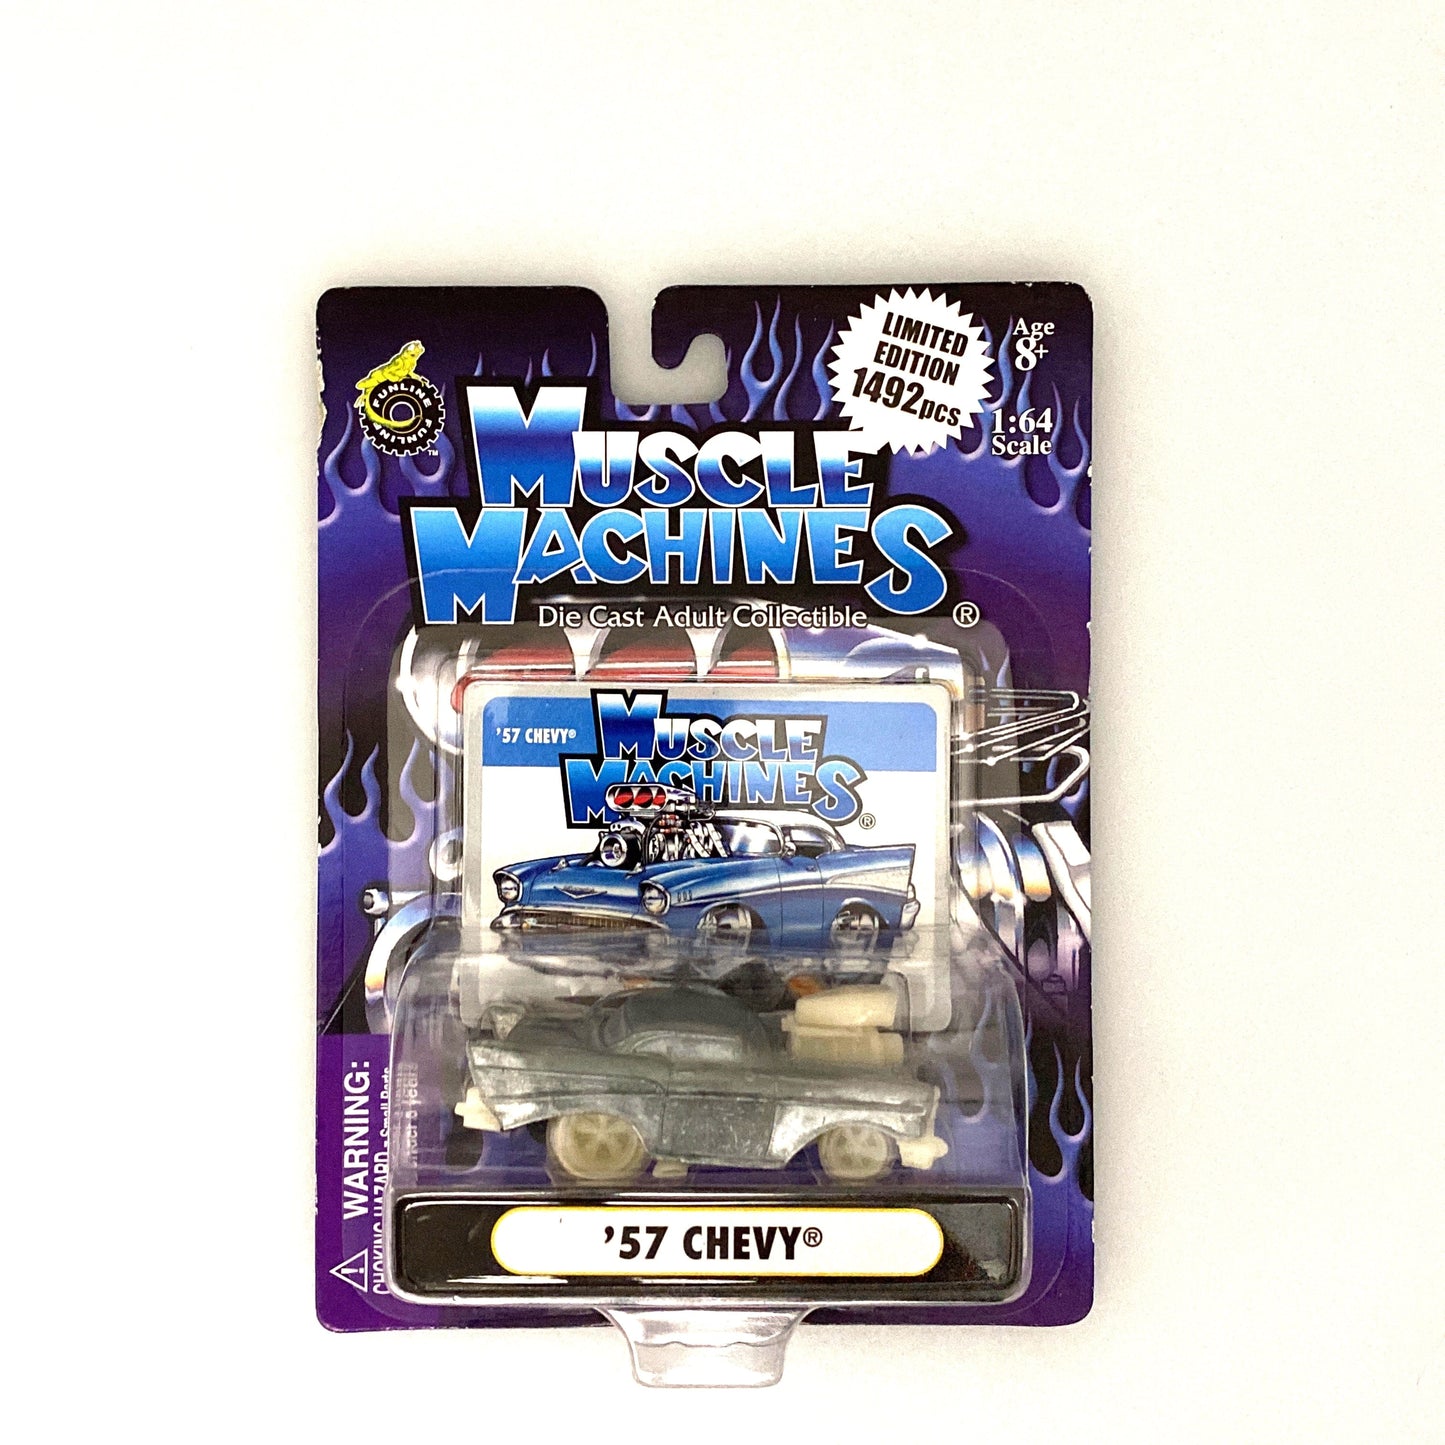 Muscle Machines '57 Chevy Gray Diecast Collectible Car 1:64 Scale Model #Limited Edition - 1492 pcs